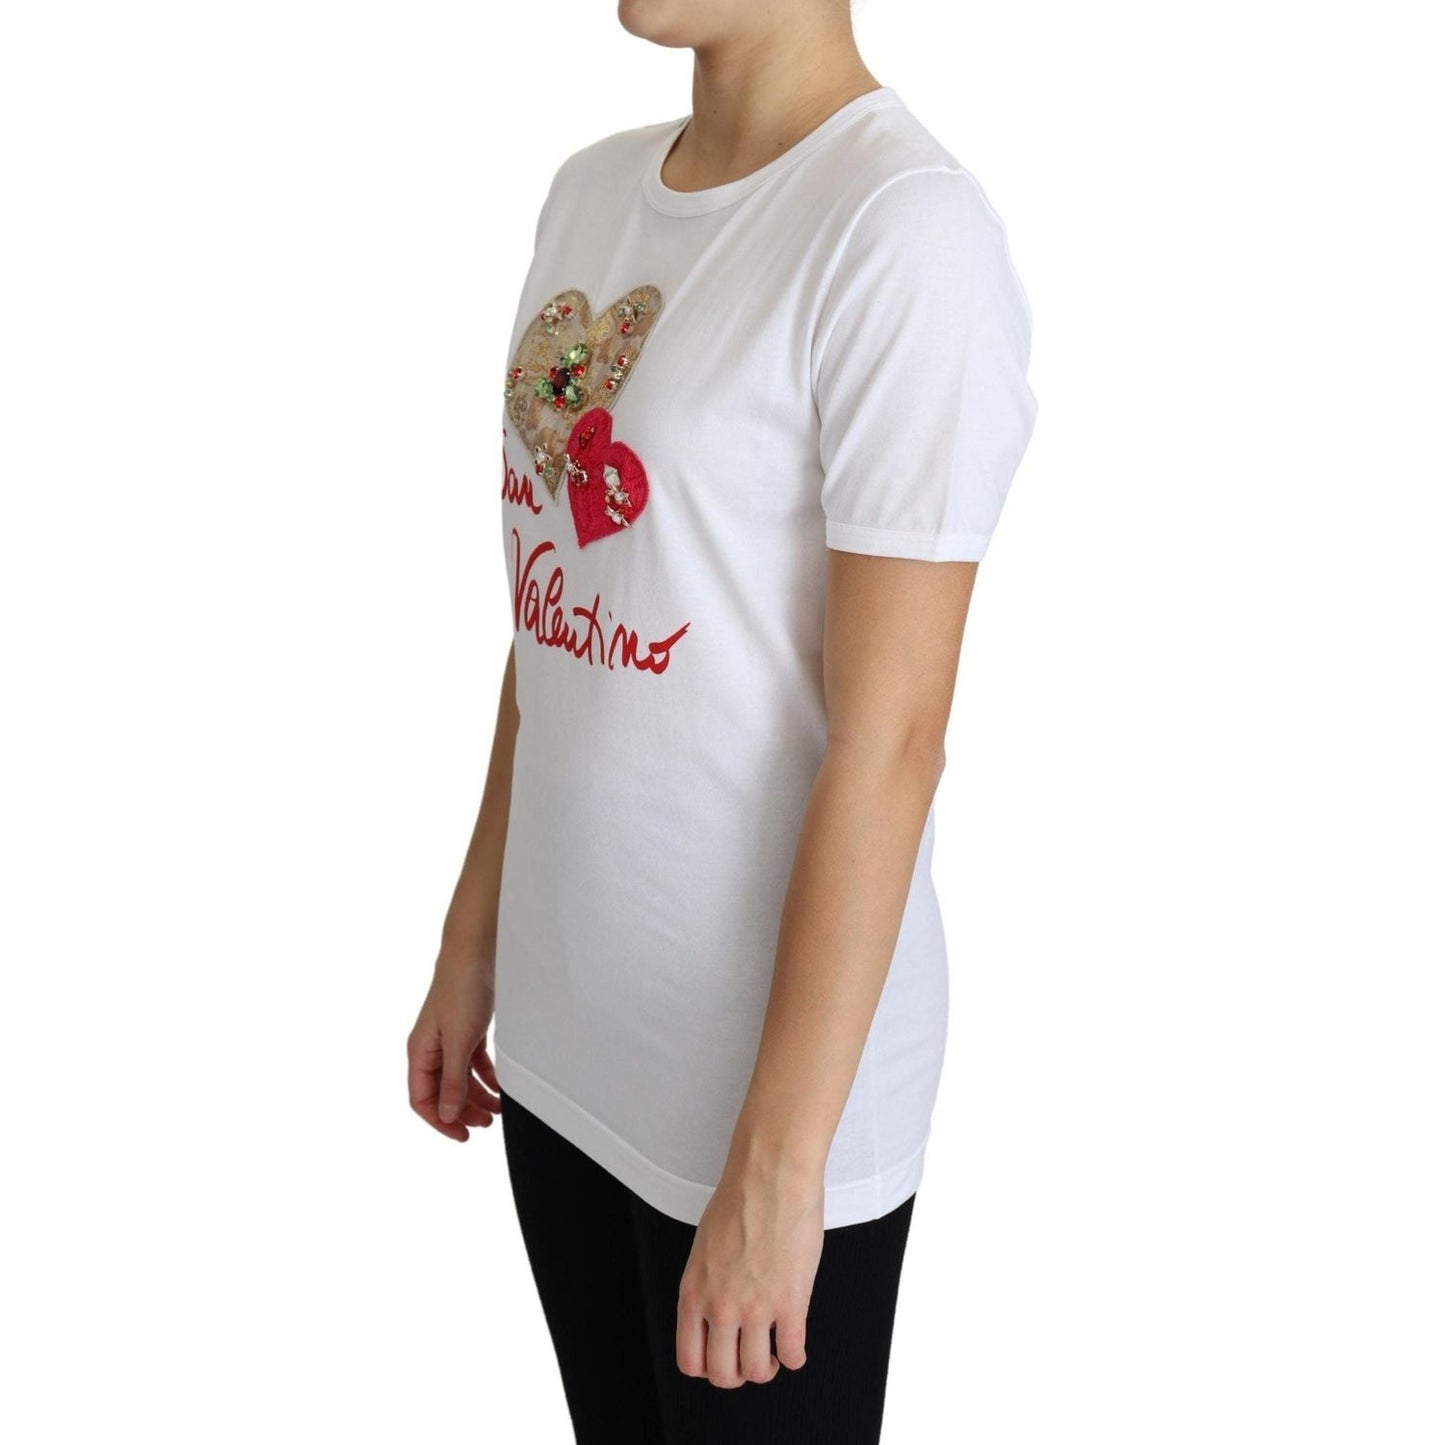 Dolce & Gabbana Crystal-Embellished White Cotton Tee white-san-valentino-heart-crystals-t-shirt-top